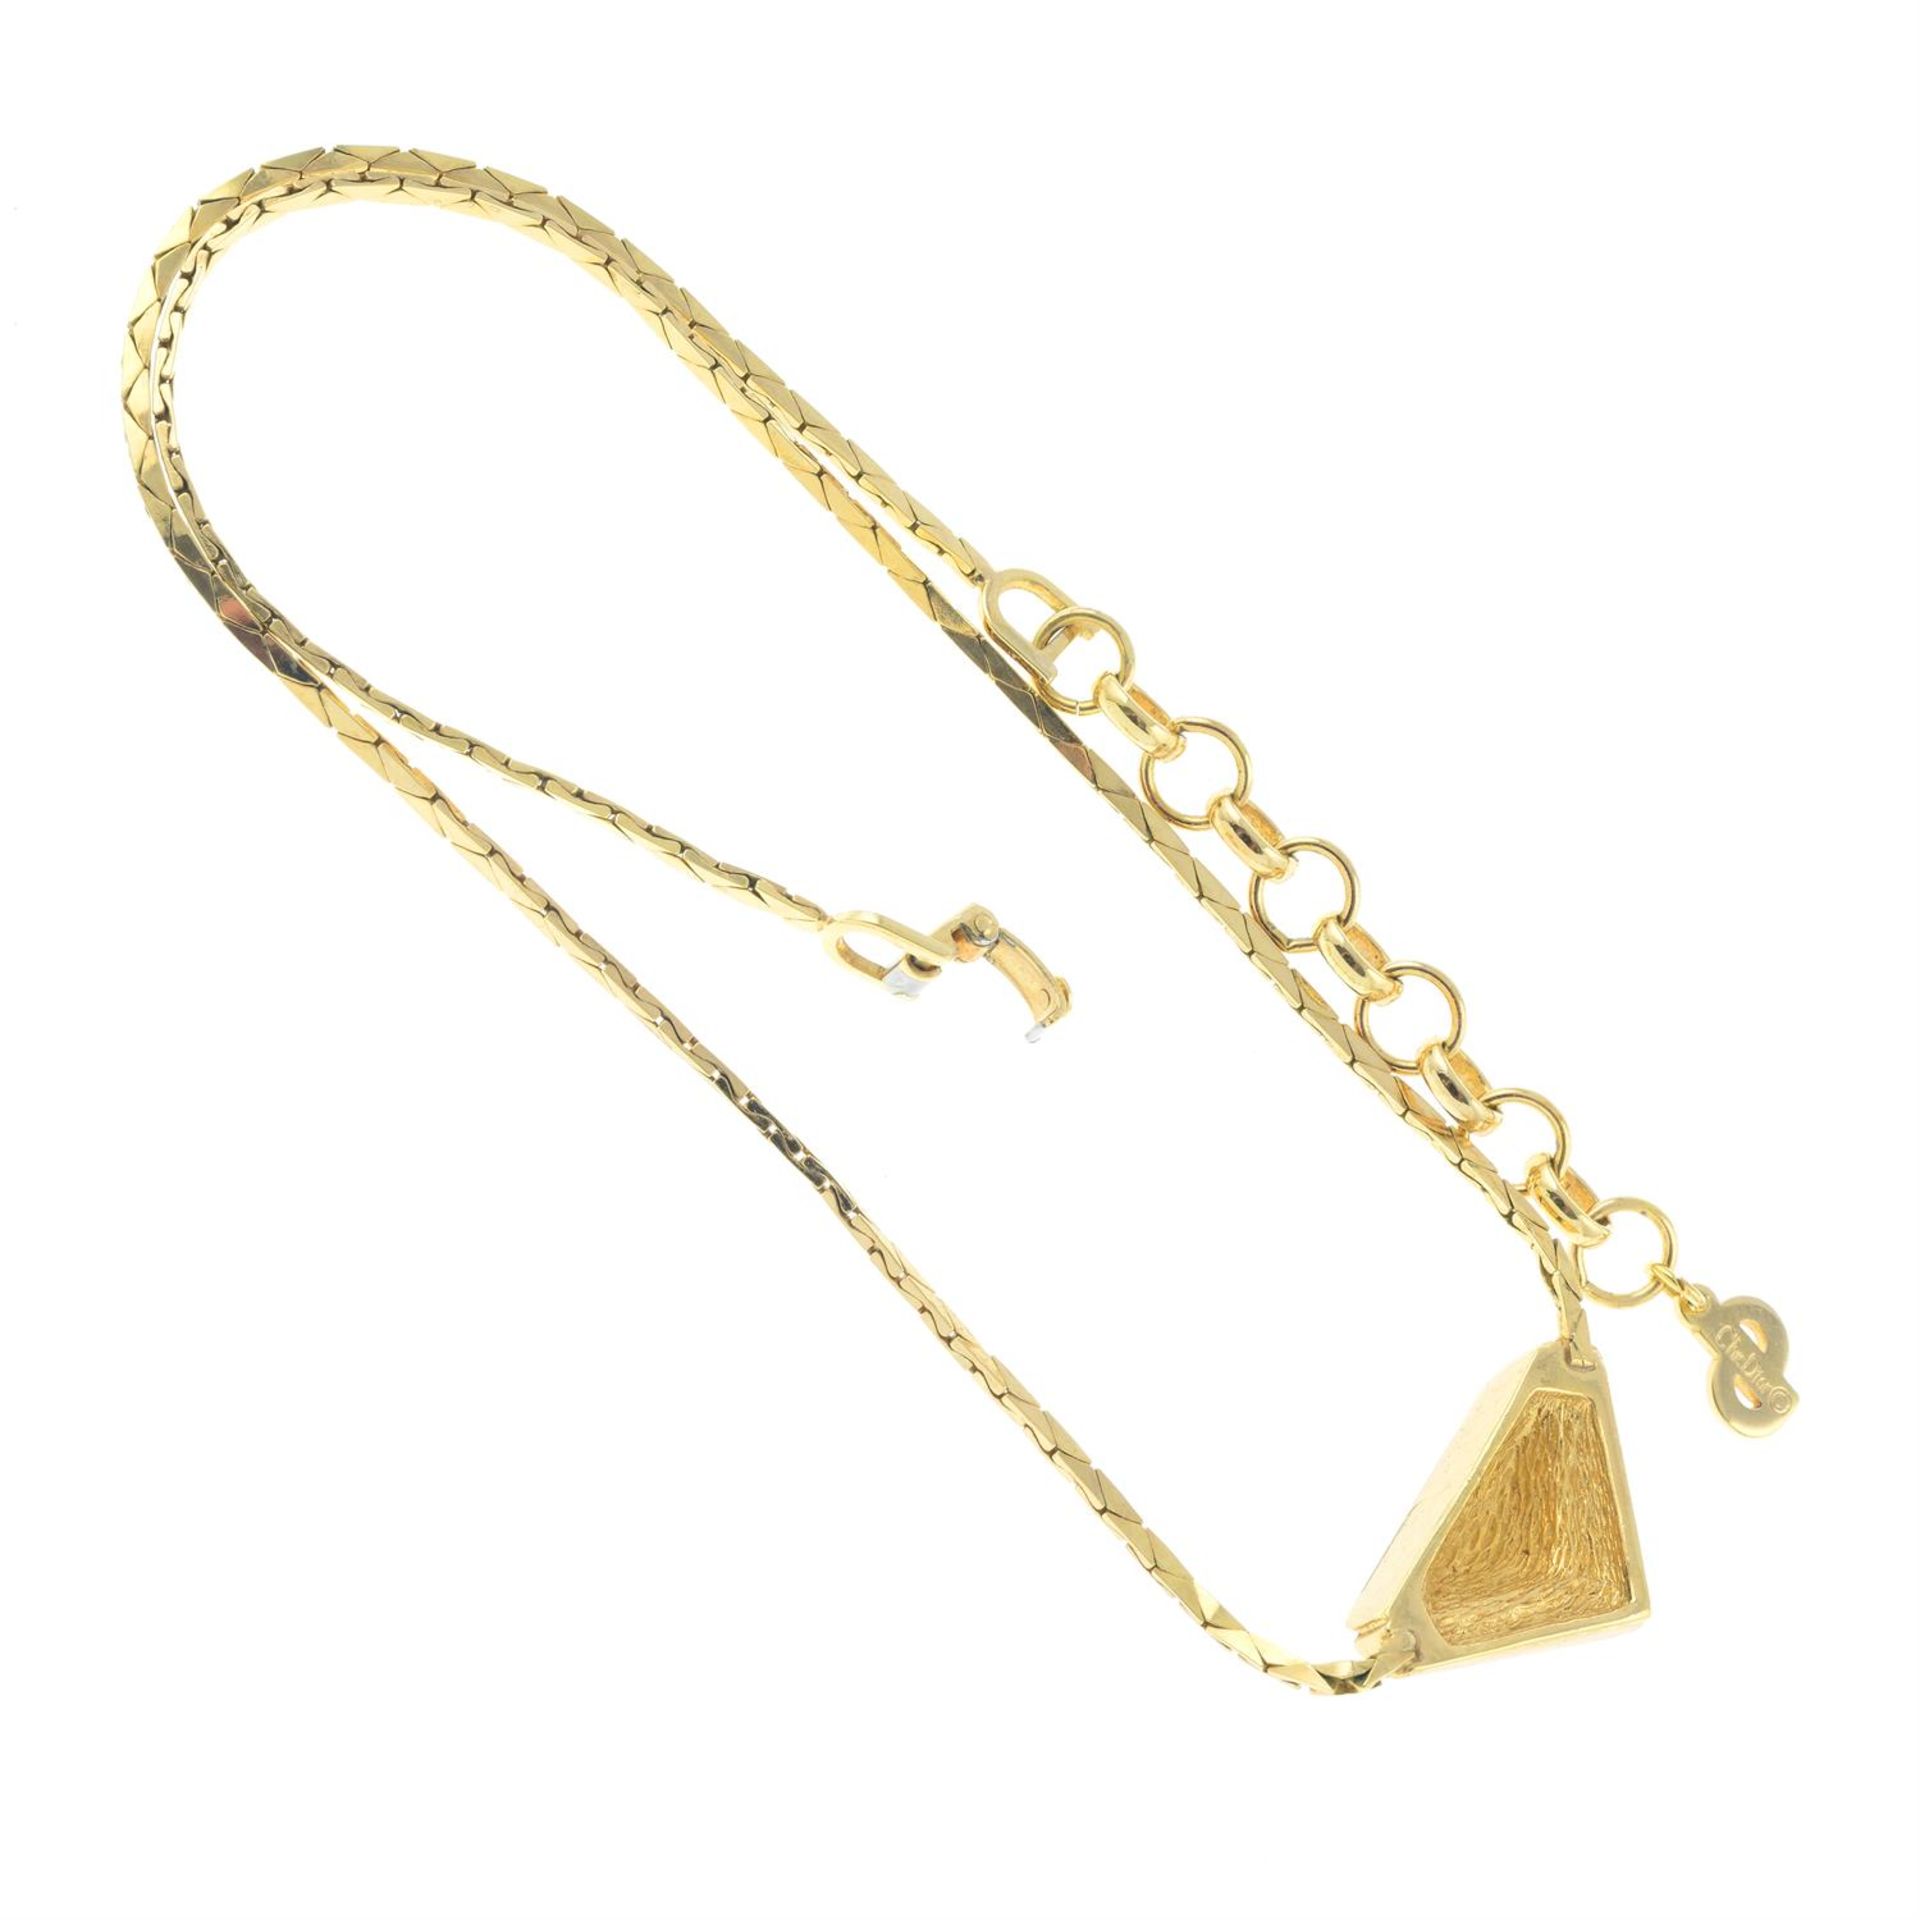 CHRISTIAN DIOR- a gold-tone necklace. - Image 2 of 3